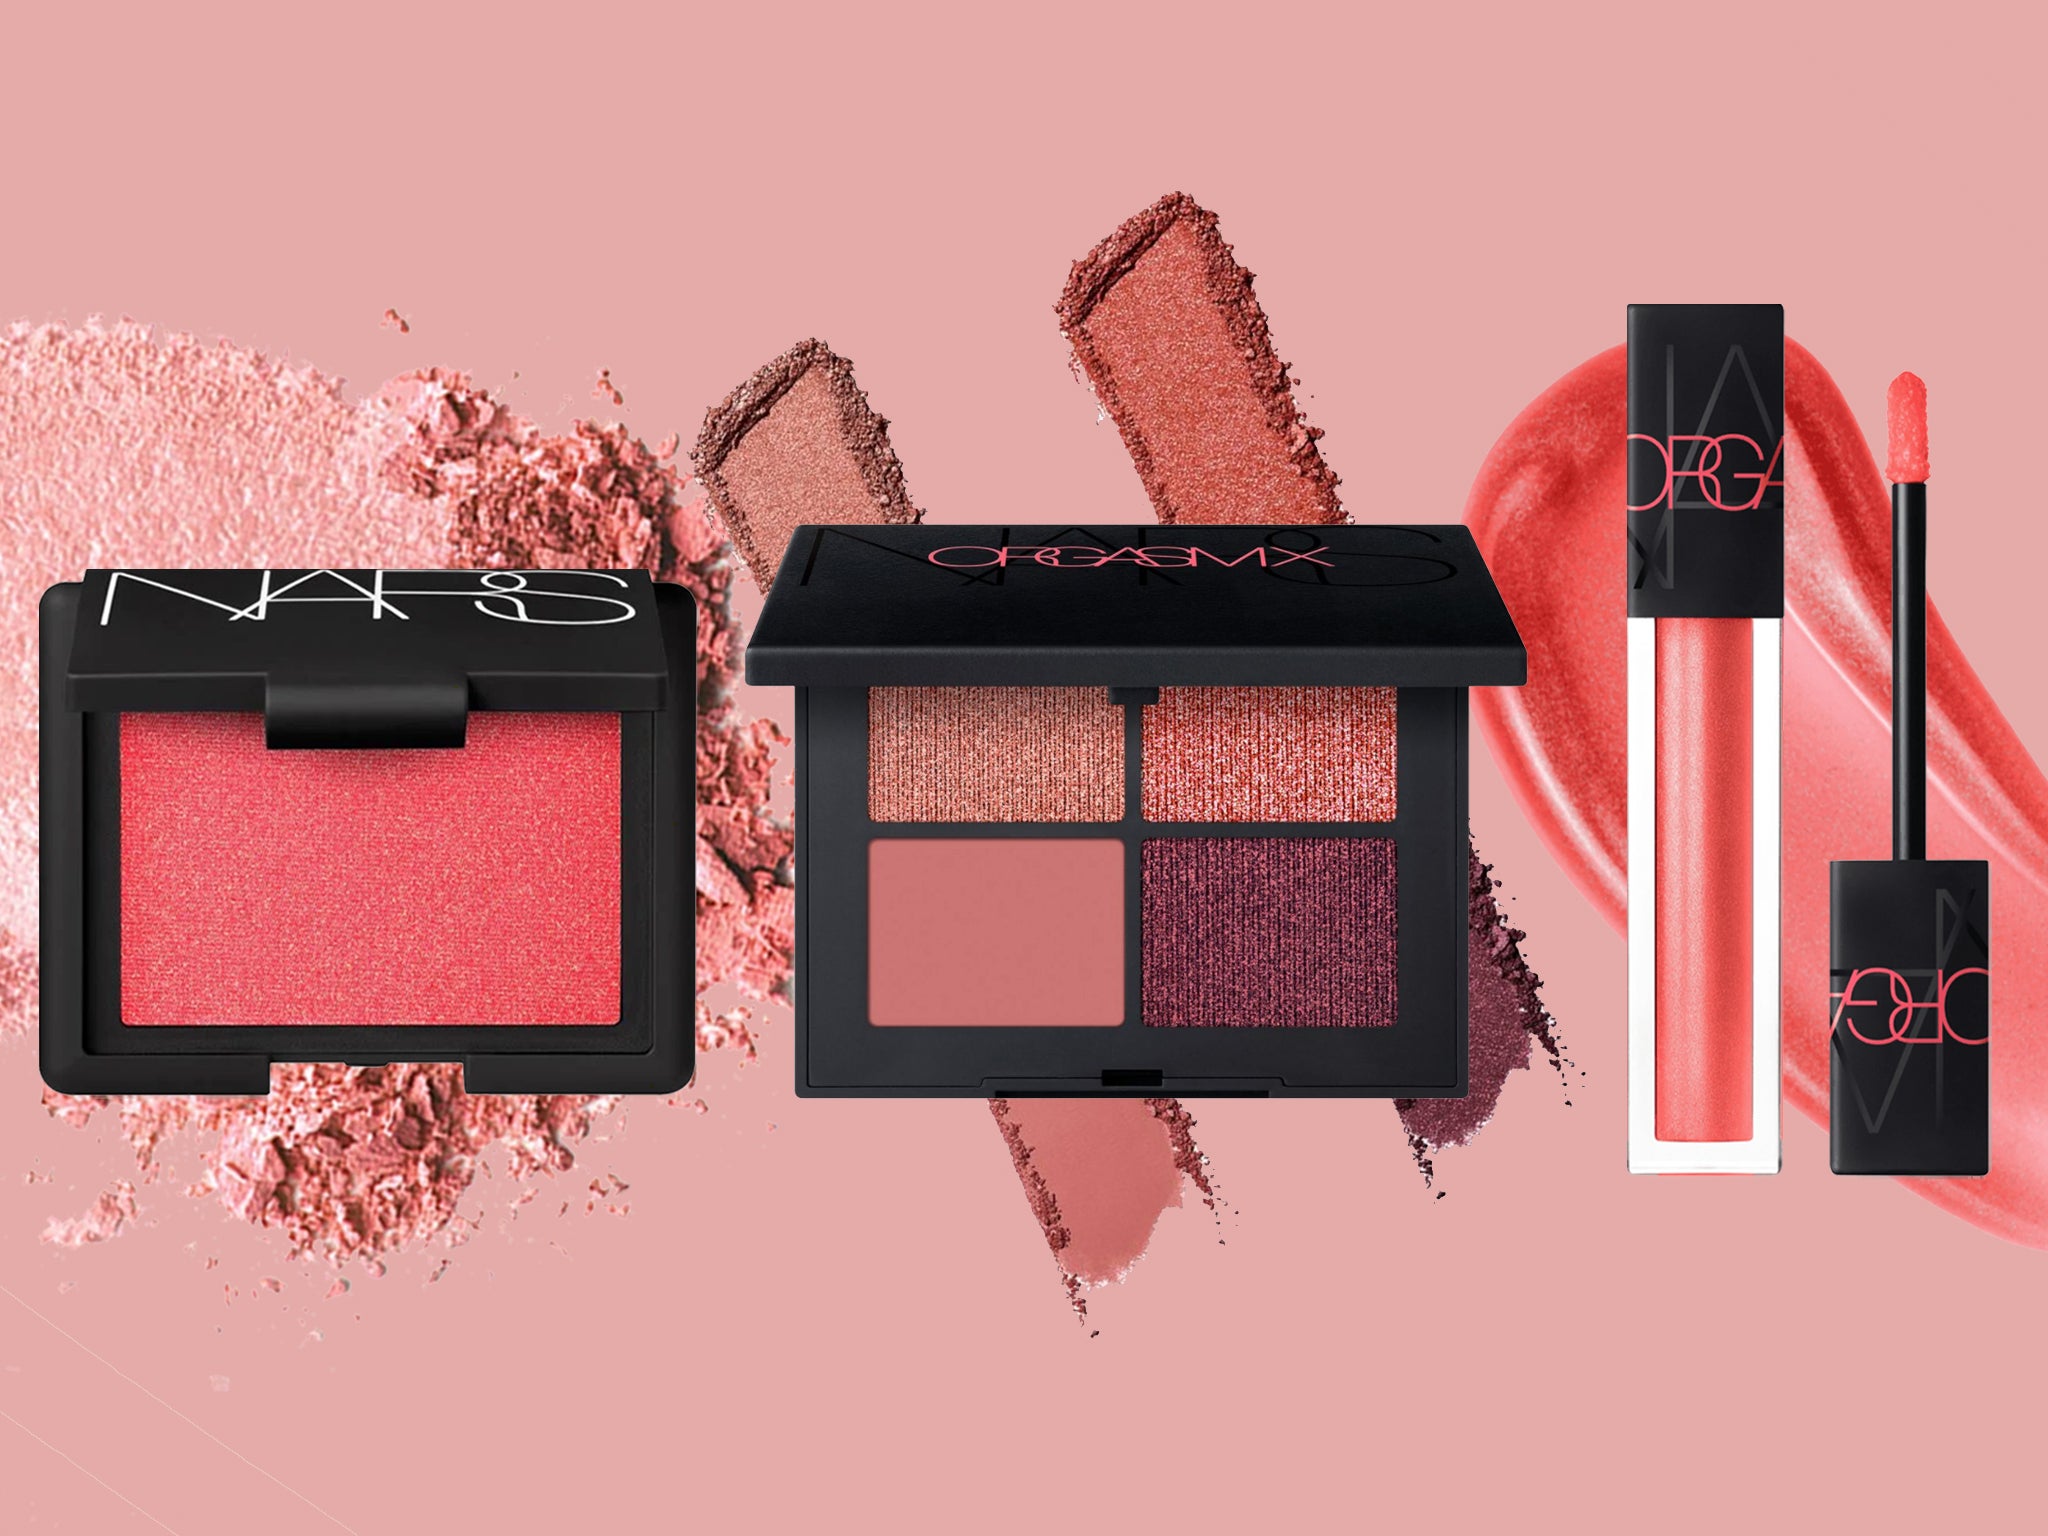 We tried Nars' new orgasm x collection – here's what we thought of the new blush shade